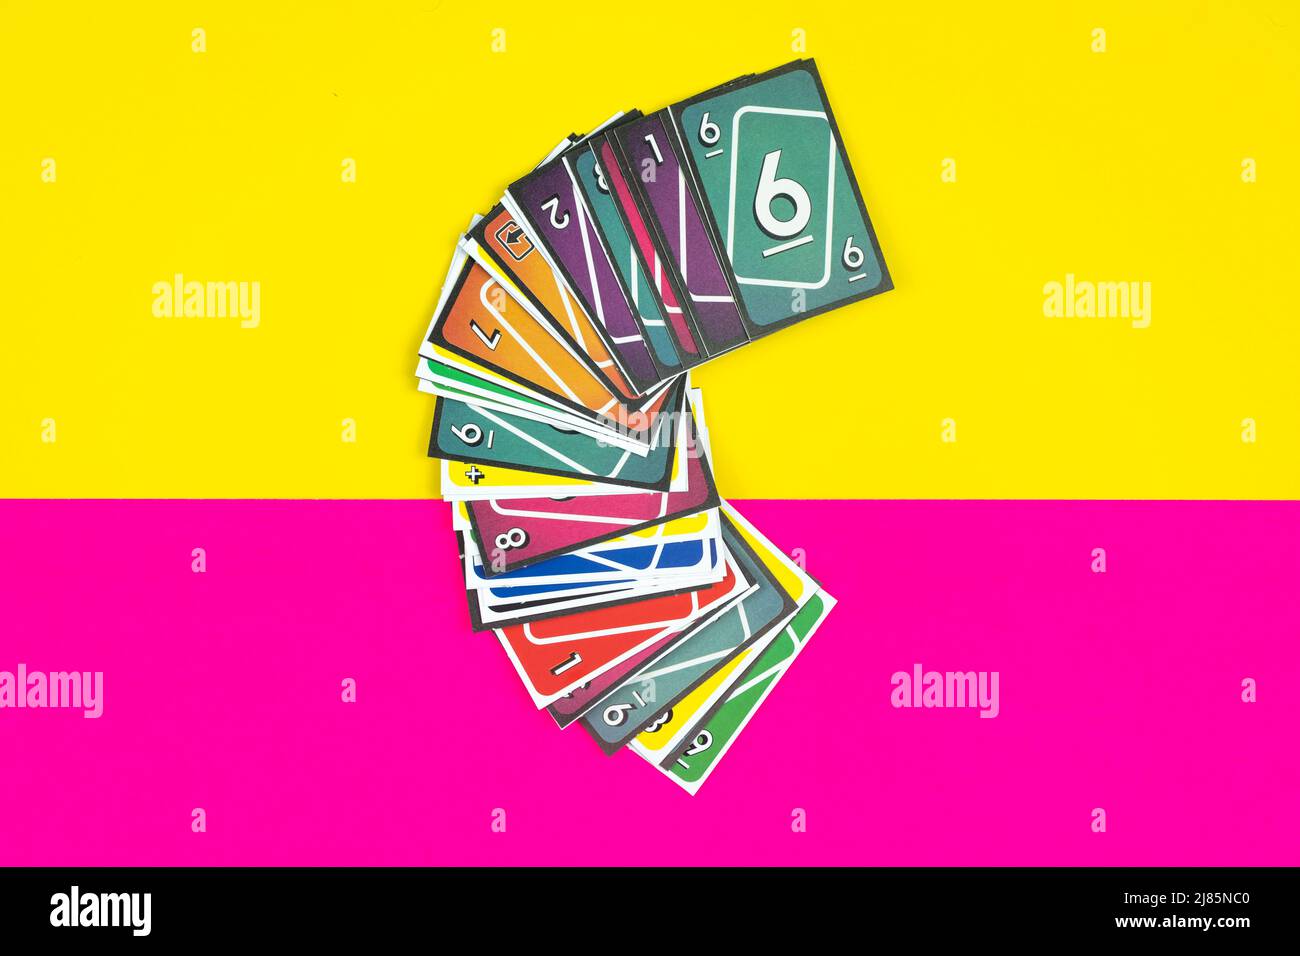 Playing cards, colorful playing card deck, entertainment and fun concept, yellow and pink background, hanging out with friends idea, top view Stock Photo